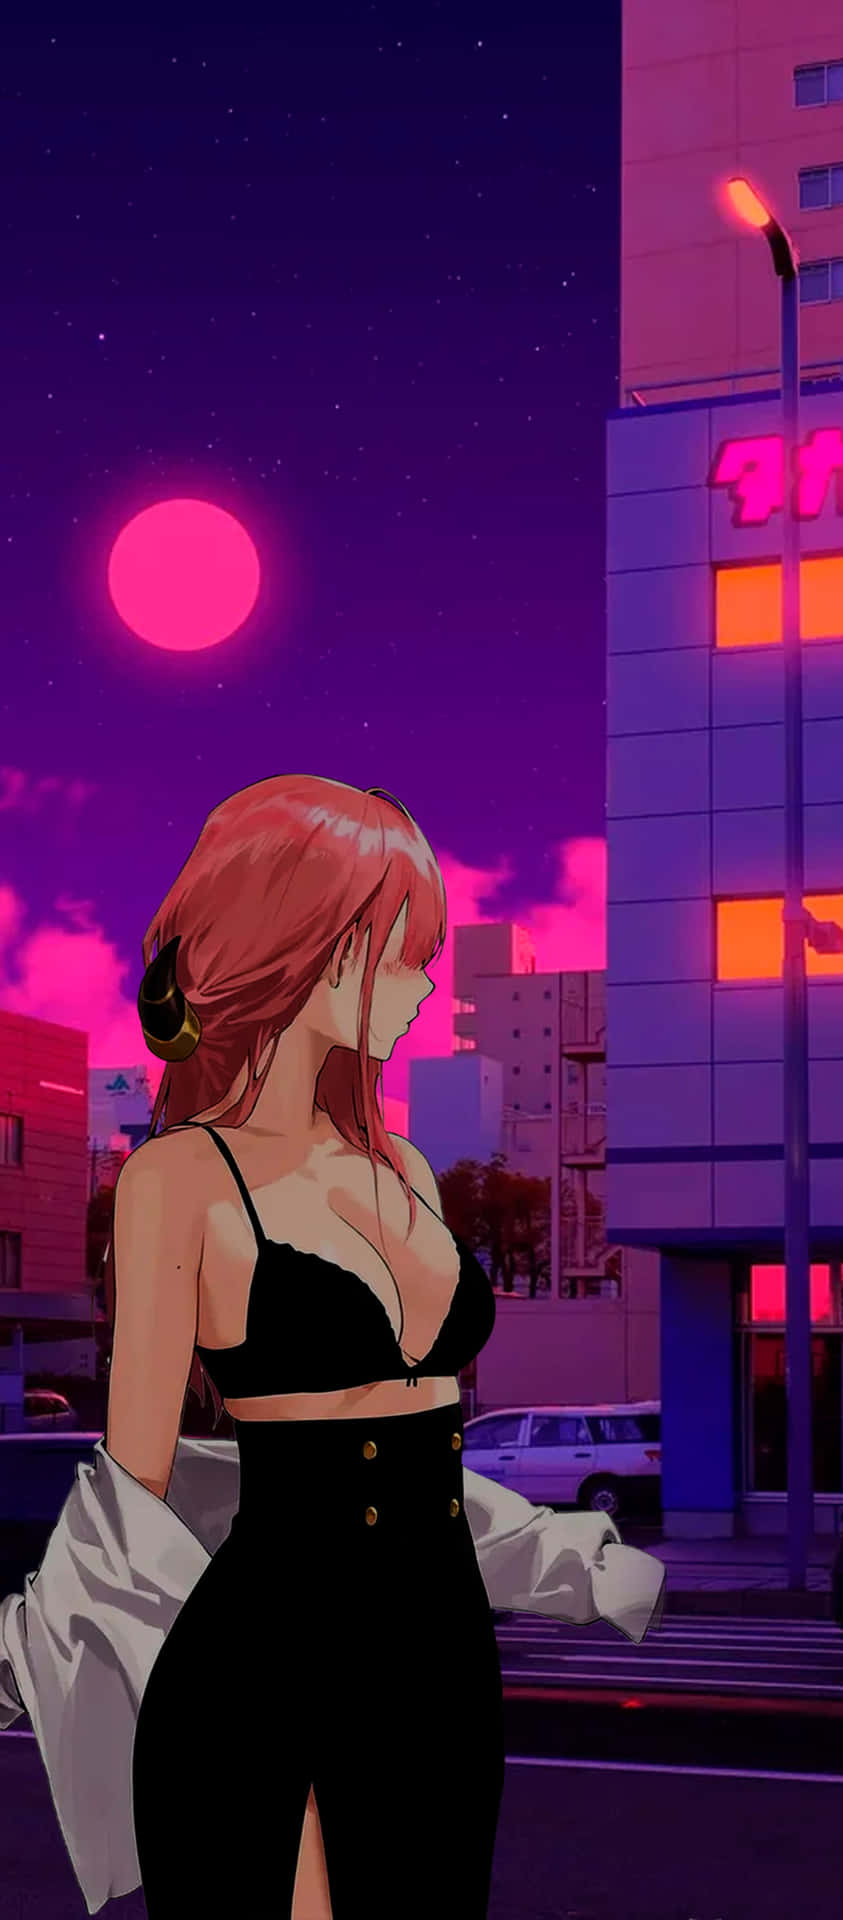 A Girl In A Black Dress Standing In Front Of A City Wallpaper